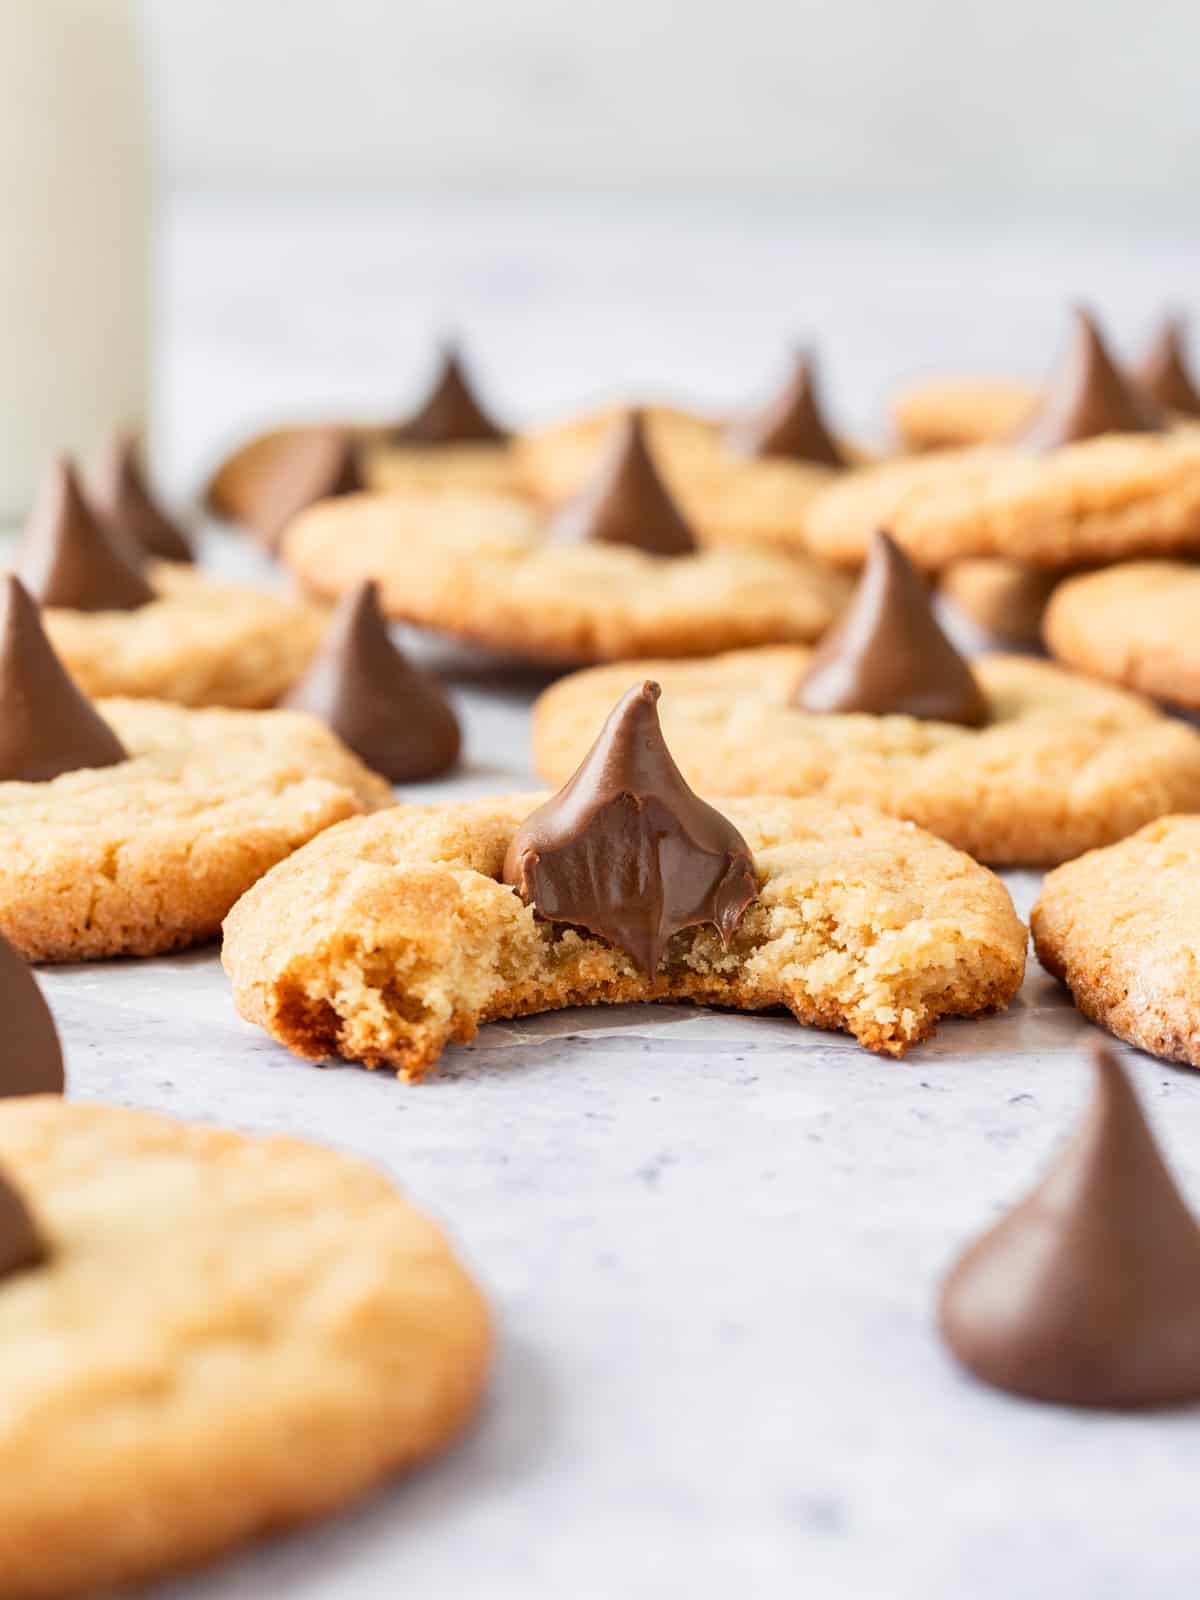 peanut butter blossoms spread out on a grey background, one has a bite out of it.